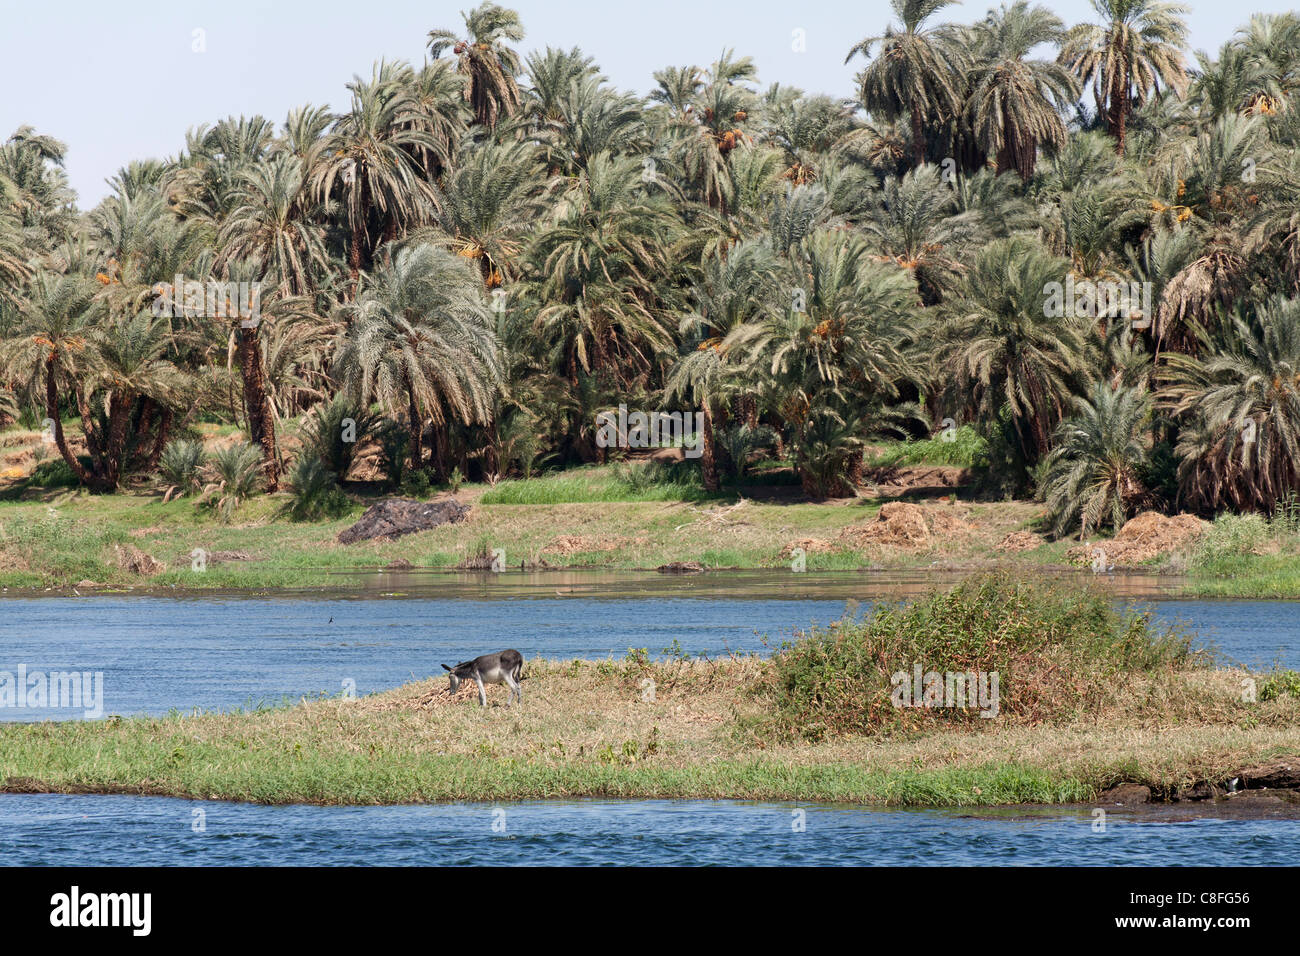 A section of Nile riverbank showing waters edge, and palms in the background with  a single donkey on a small island in front Stock Photo